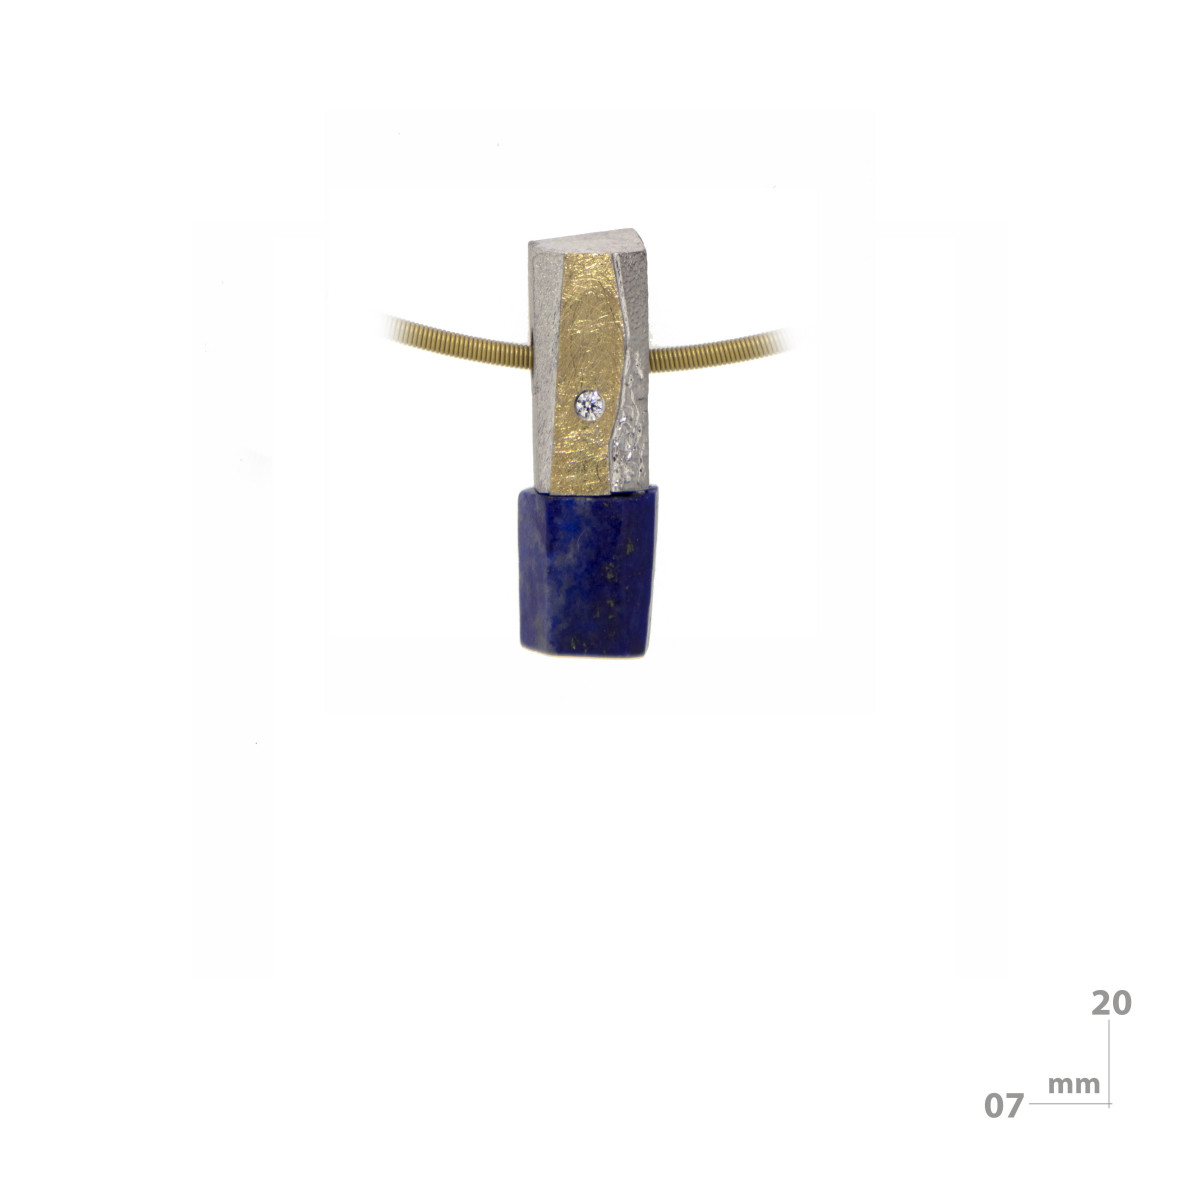 Pendant made of silver, 18k gold, lapis lazuli and brilliant